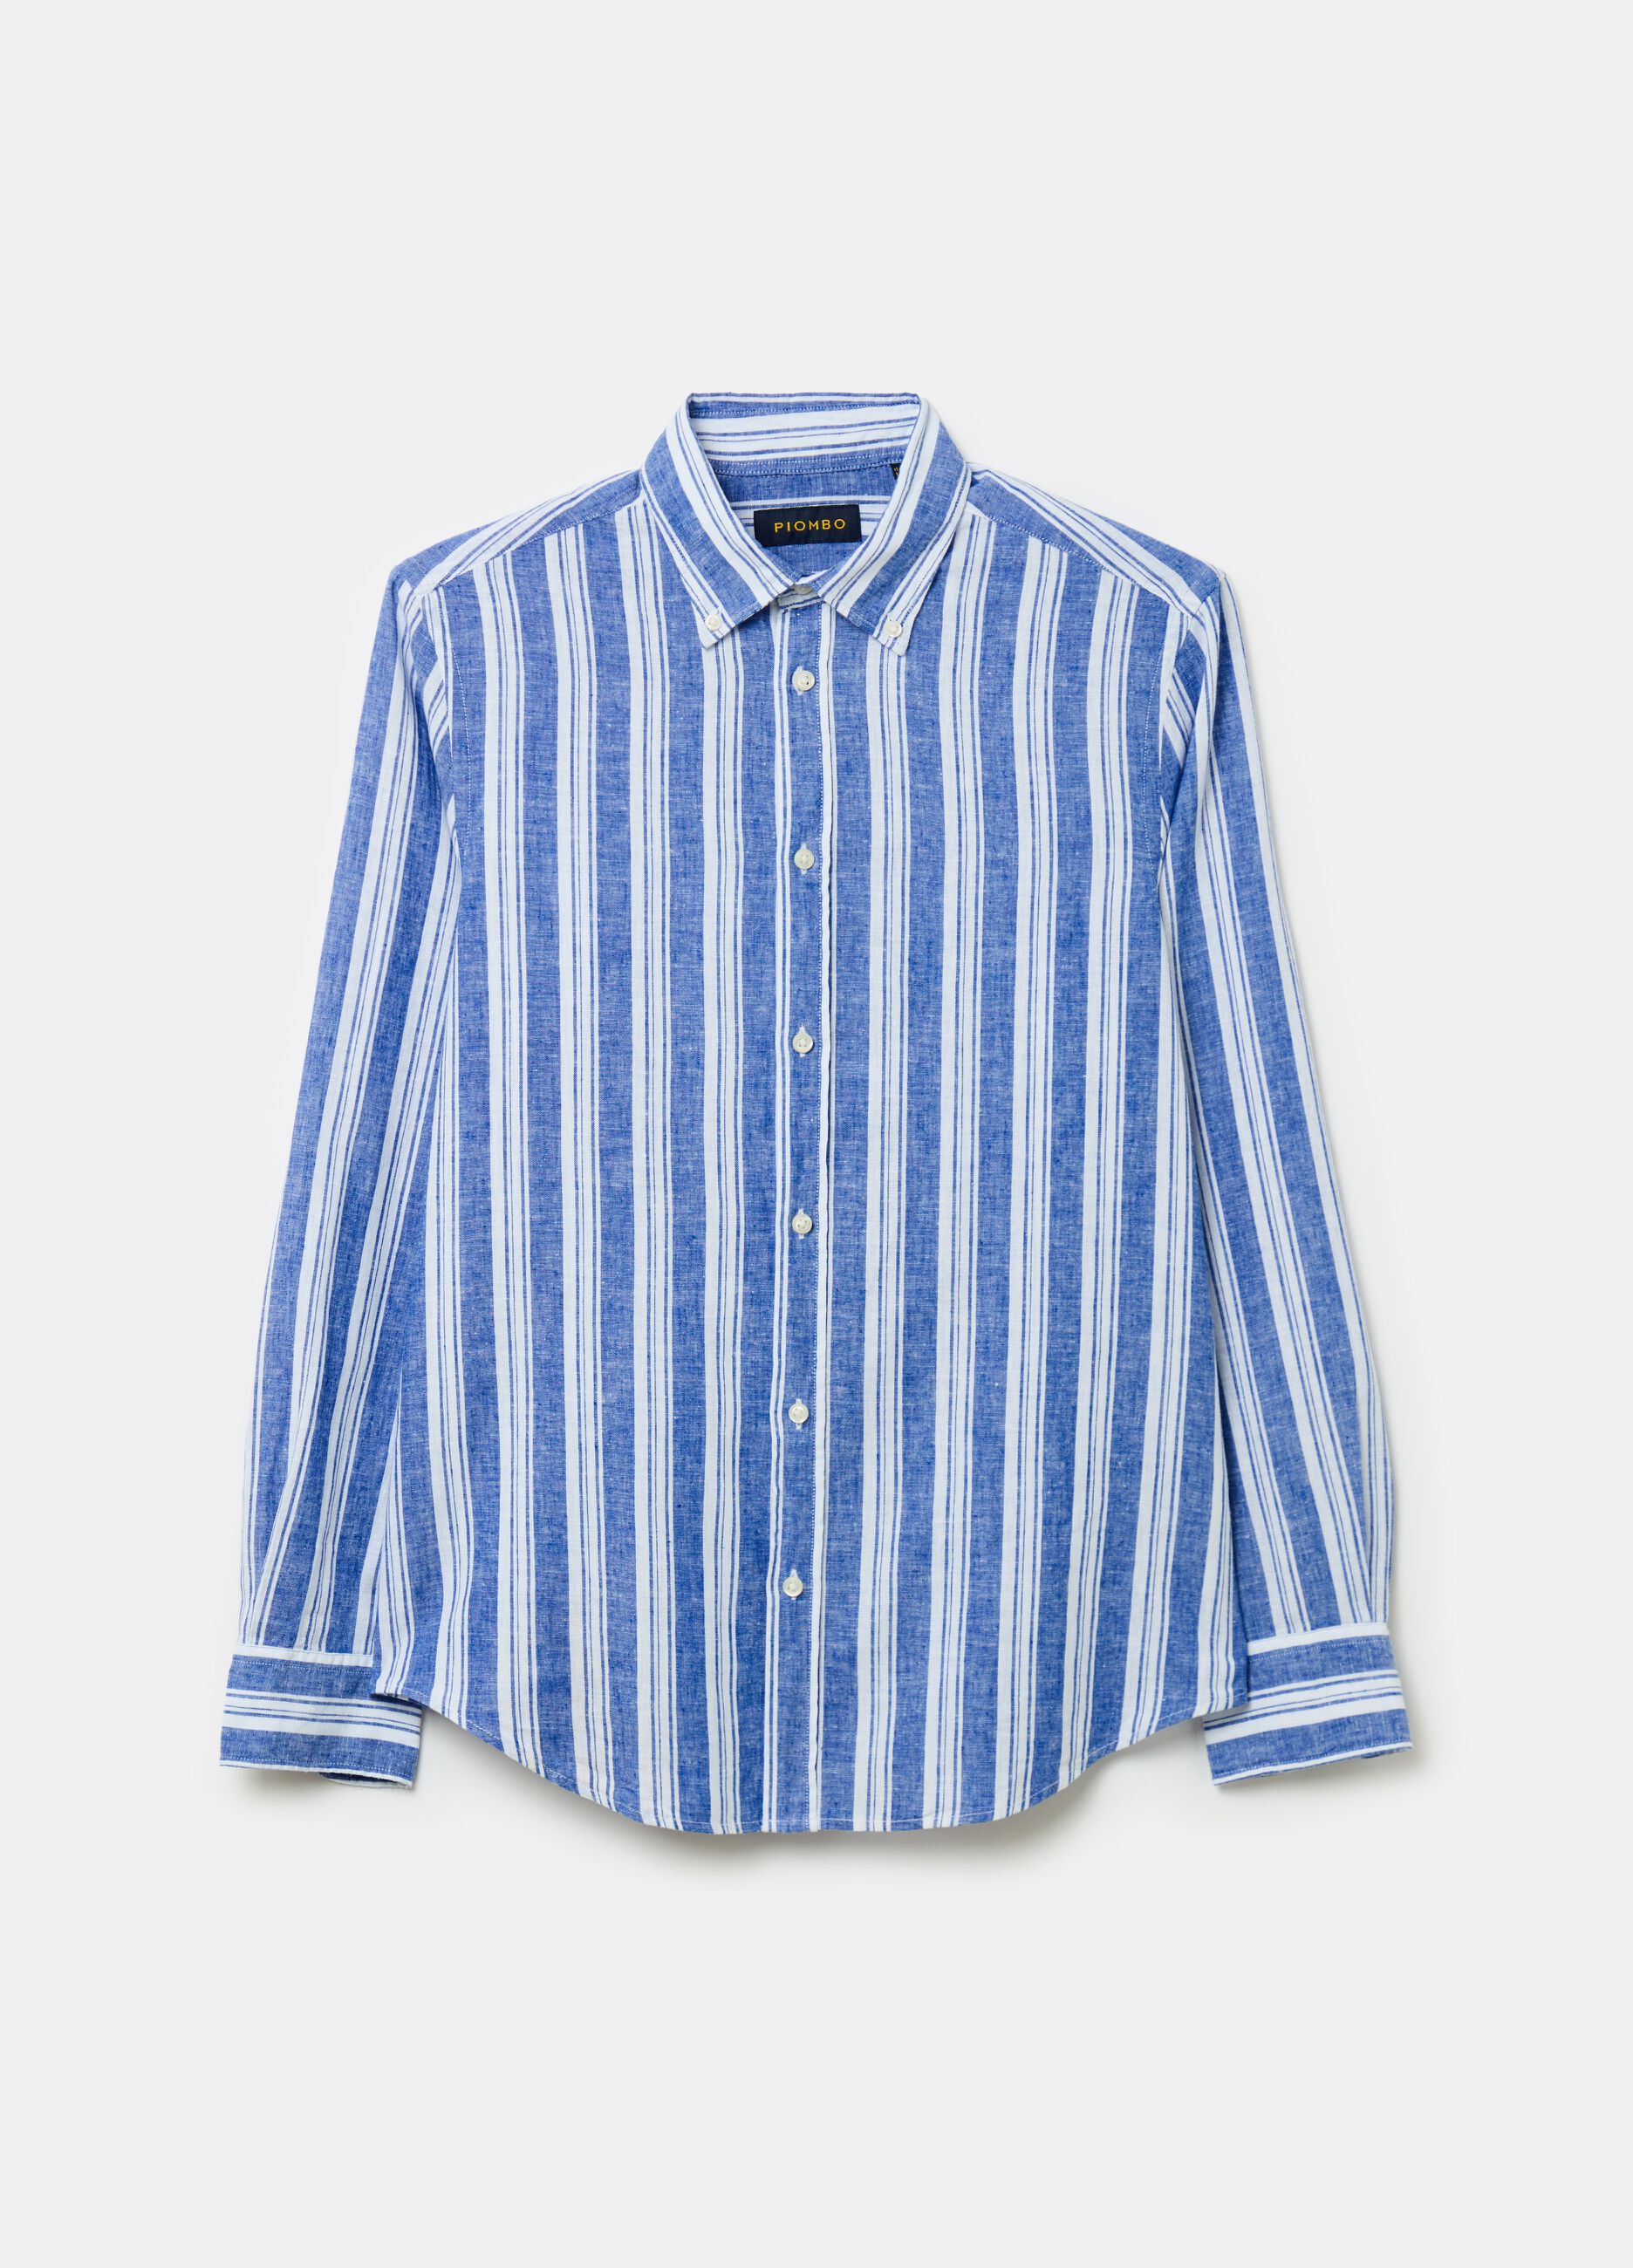 Striped linen and cotton shirt